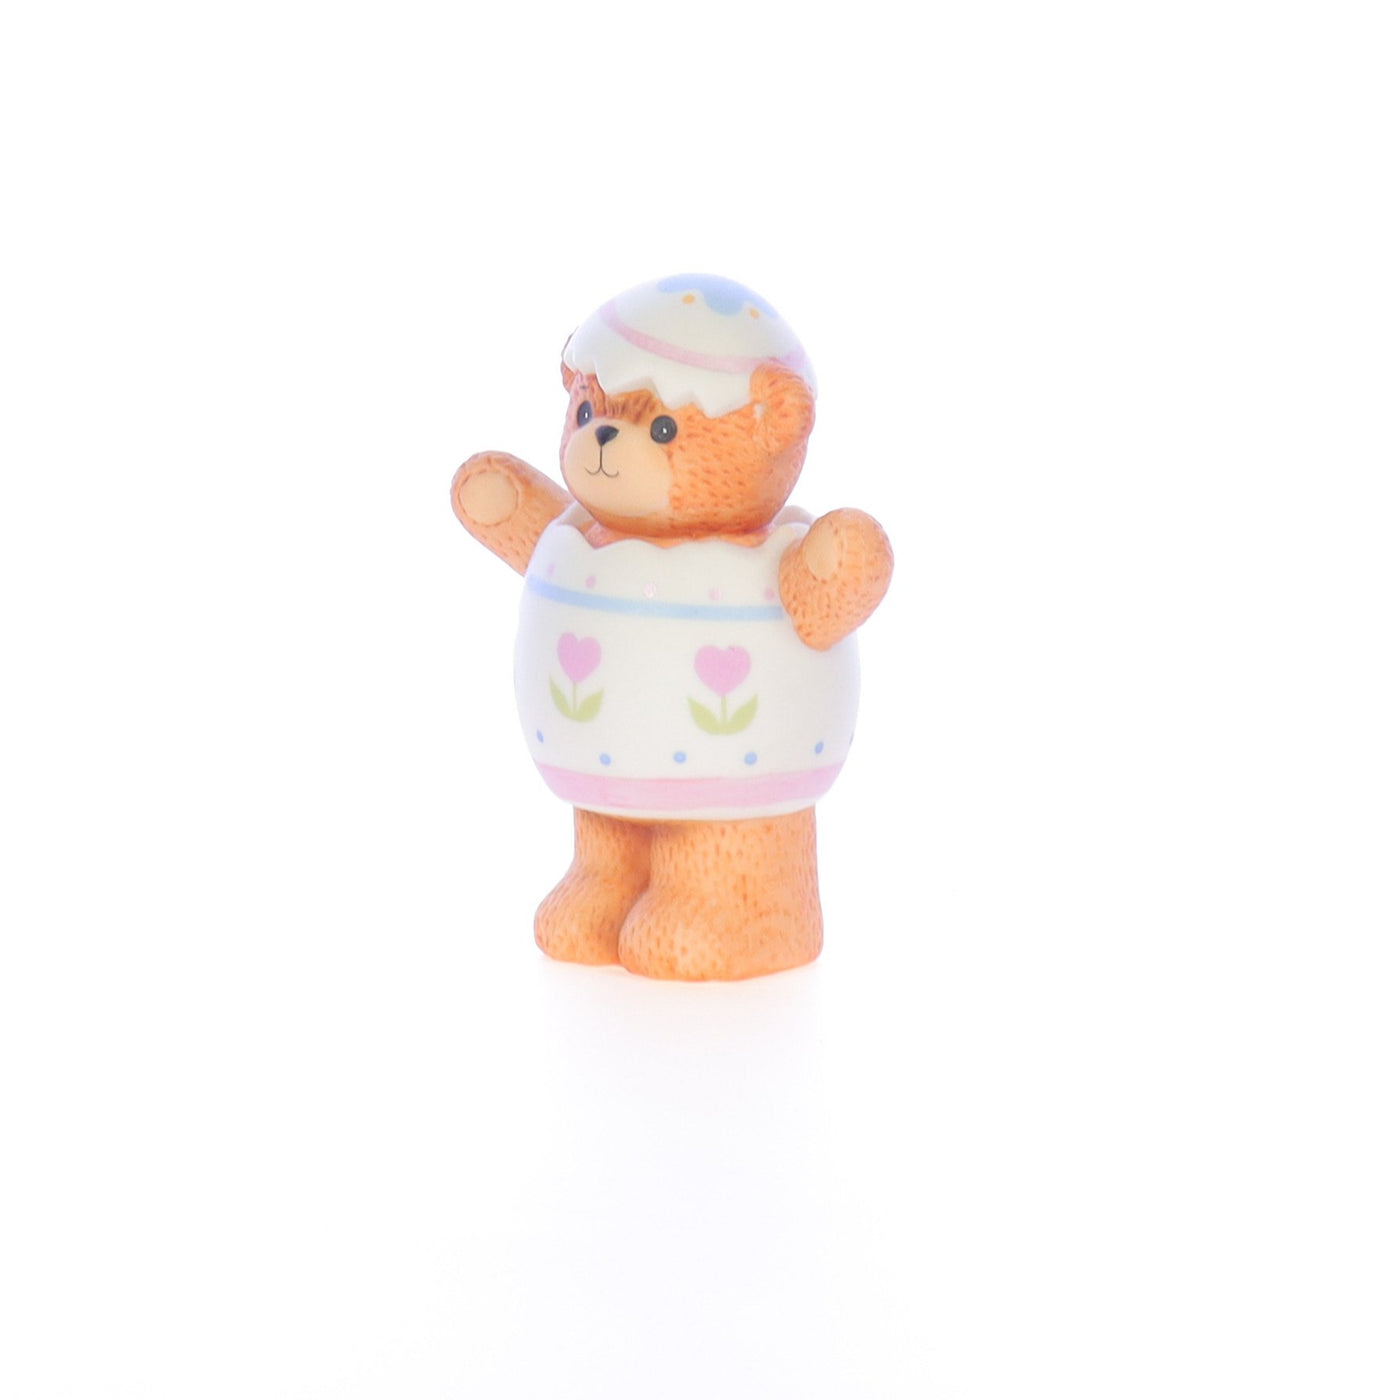 Lucy_And_Me_by_Lucy_Atwell_Porcelain_Figurine_Bear_in_Easter_Egg_Costume_Lucy_Unknown_056_02